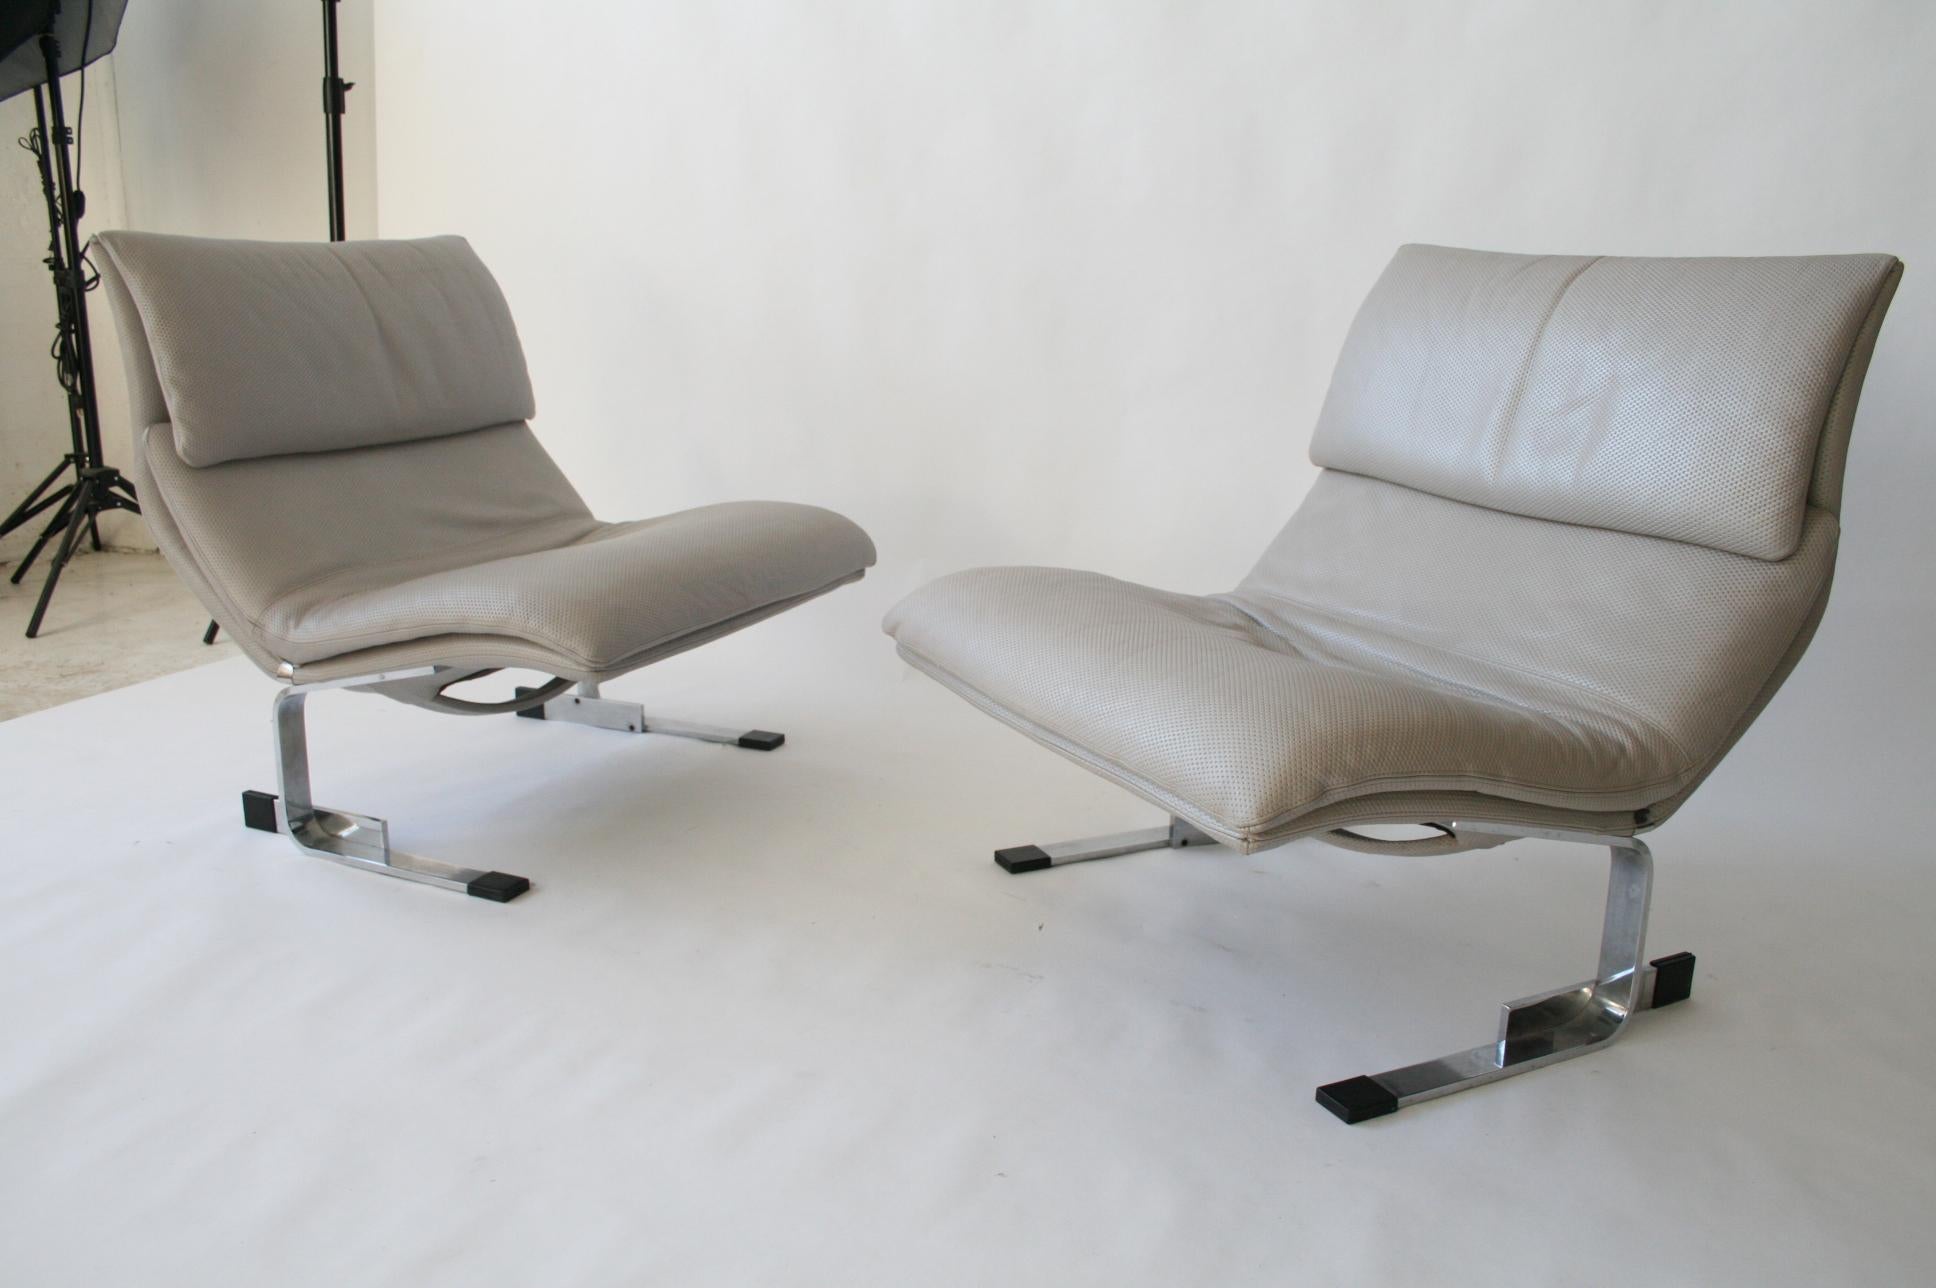 Stainless Steel Pair of Giovanni Offredi Onda Leather Lounge Chairs for Saporiti Italia